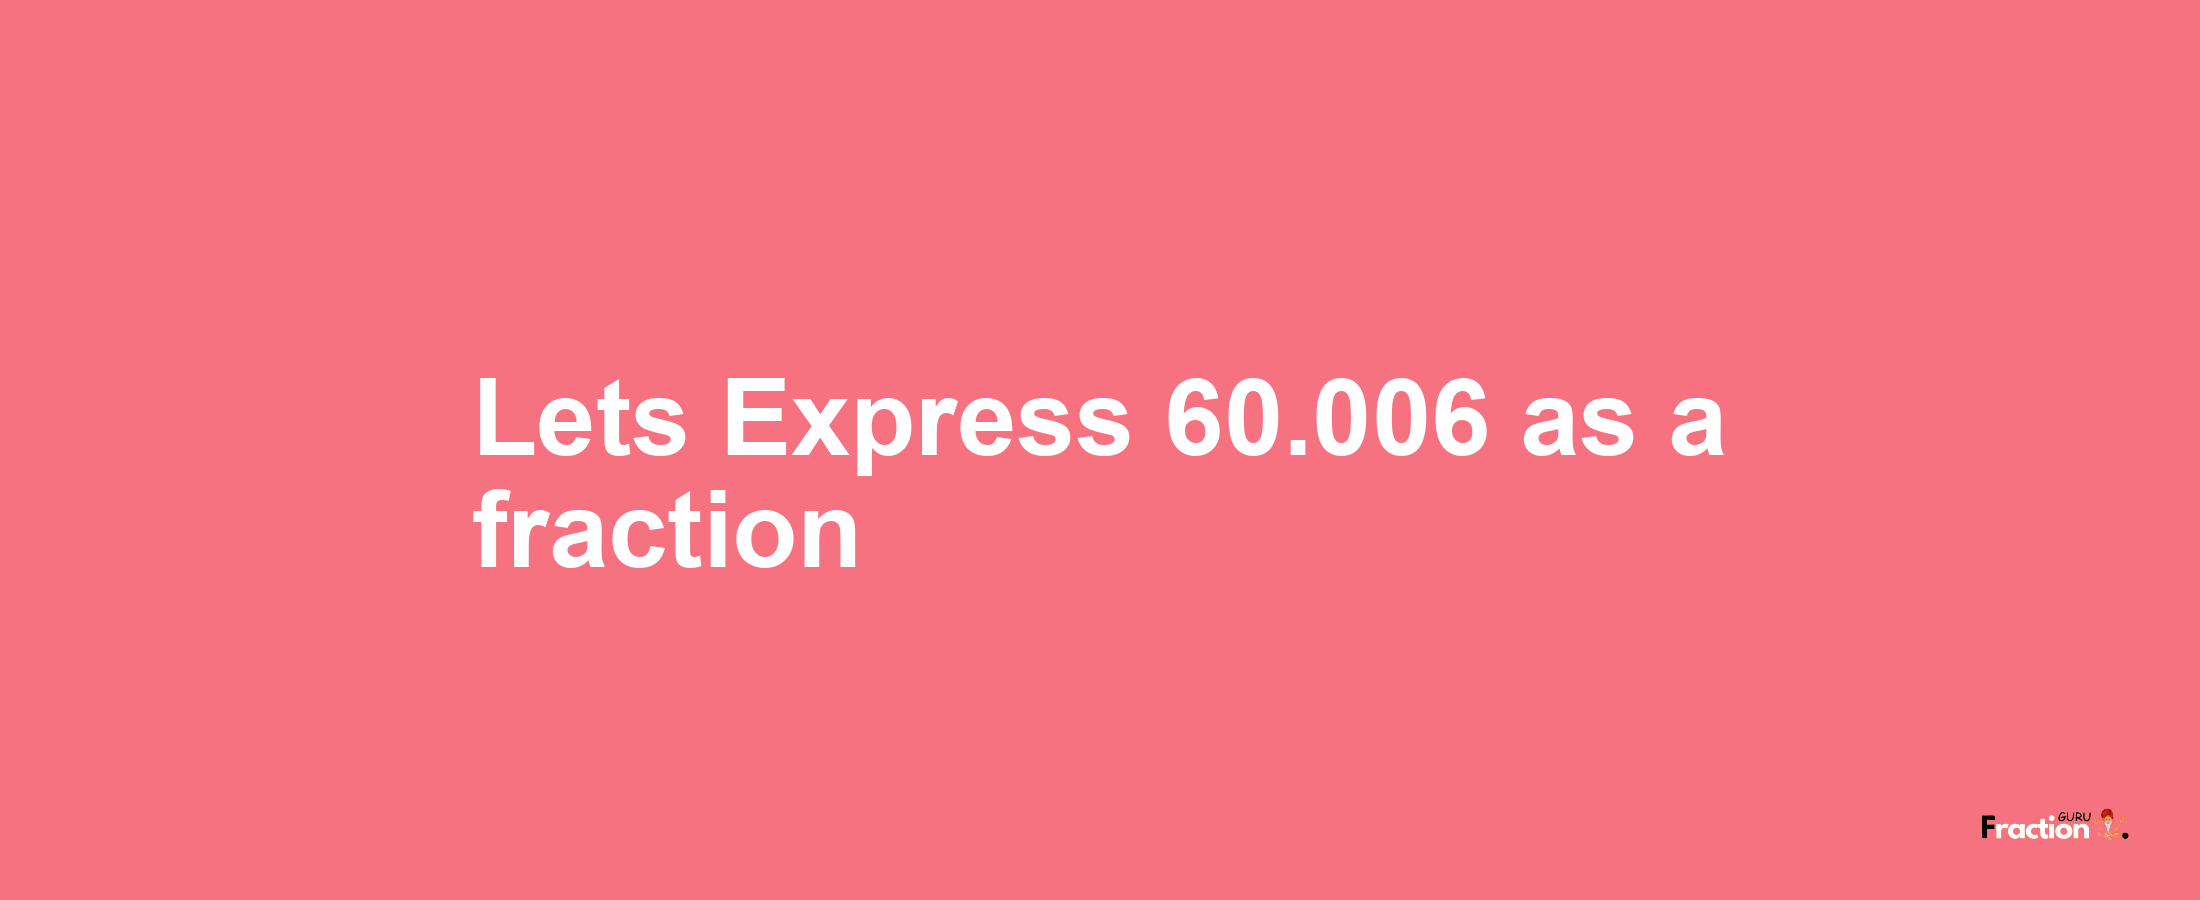 Lets Express 60.006 as afraction